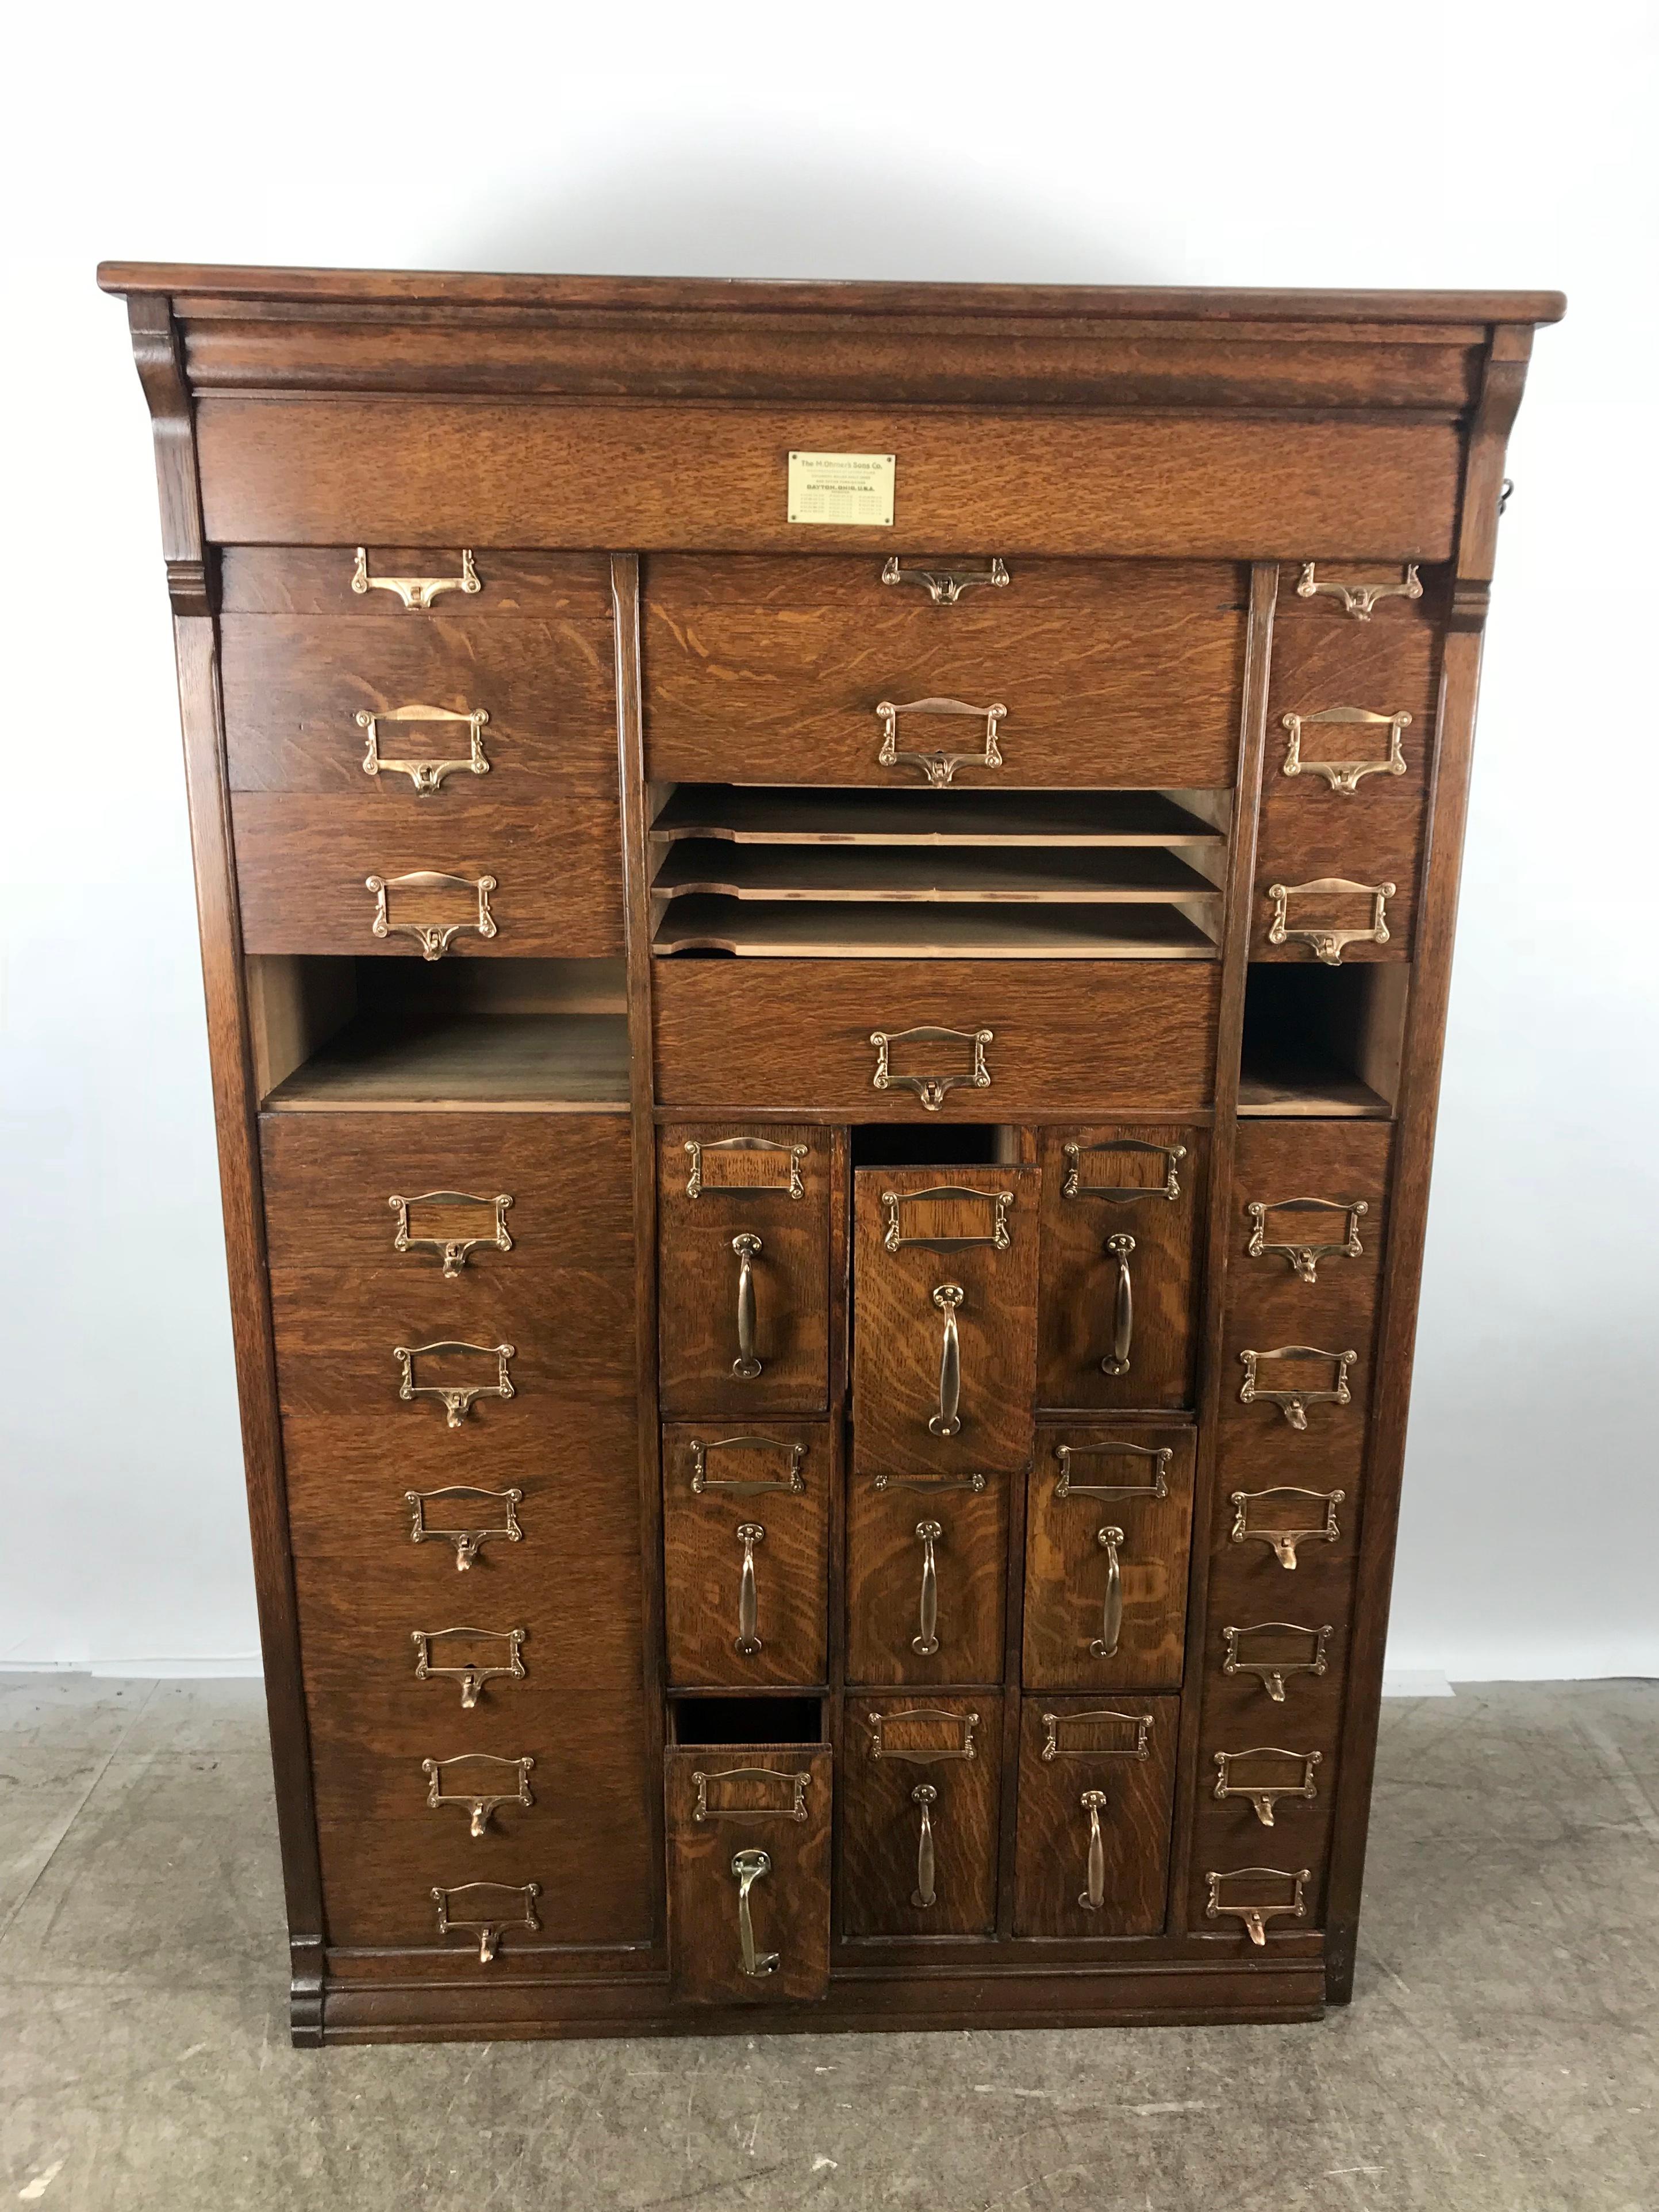 Stunning turn of the century 30-drawer antique oak cabinet made by The M.Onmer's Sons Co. Professionally restored, refinished, polished out brass hardware. Very functional, business files, card files, flat documents etc. Hand delivery avail to New